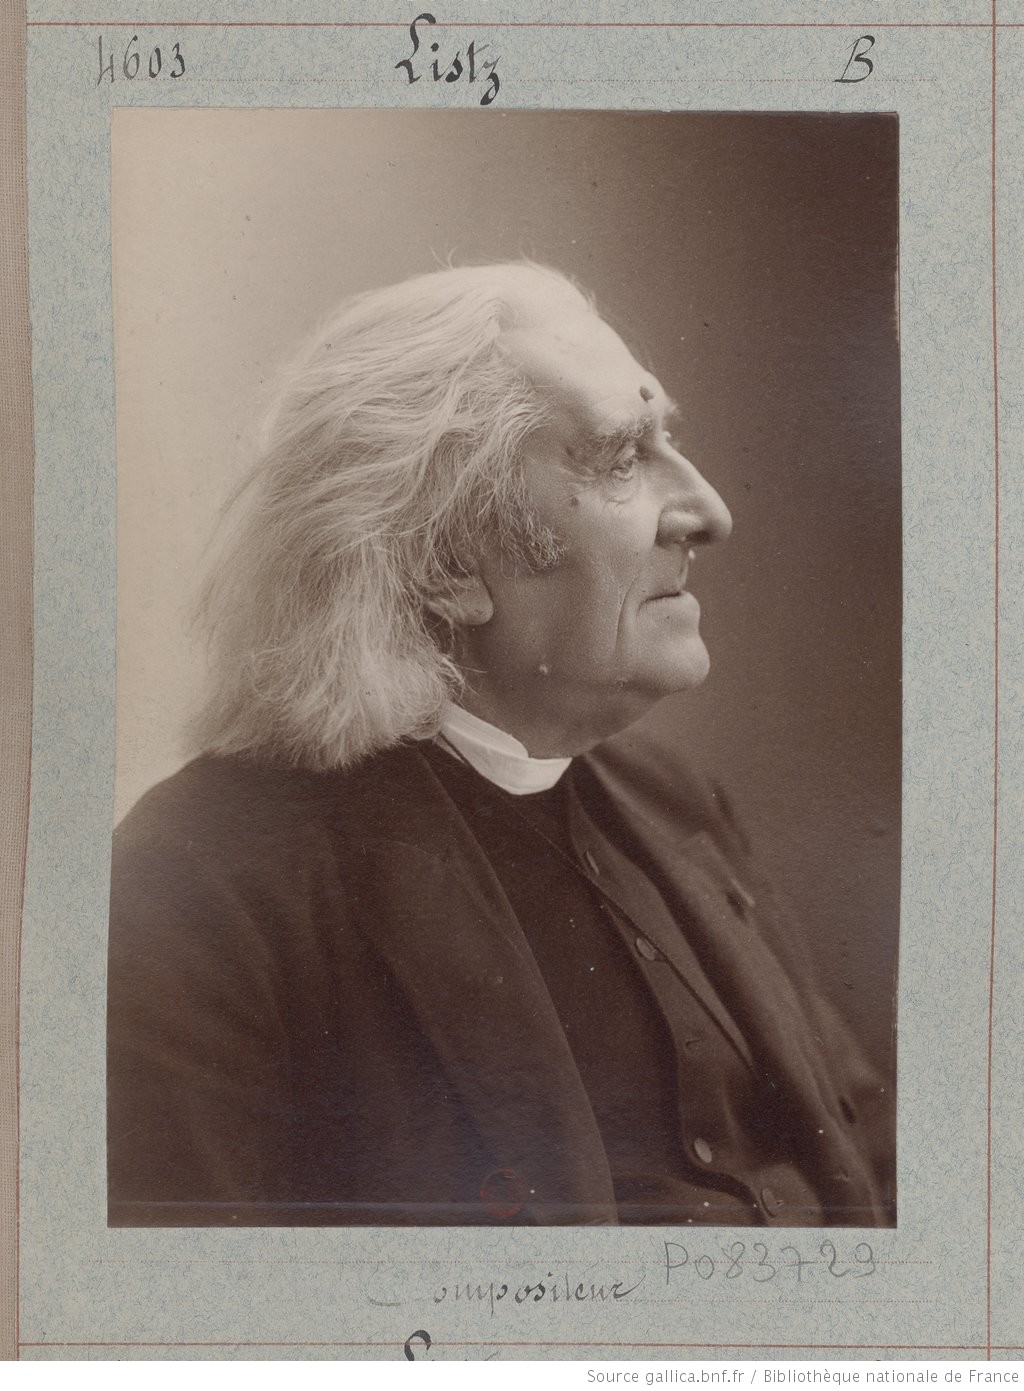 Liszt portrait number 3 in black and white taken by Nadar